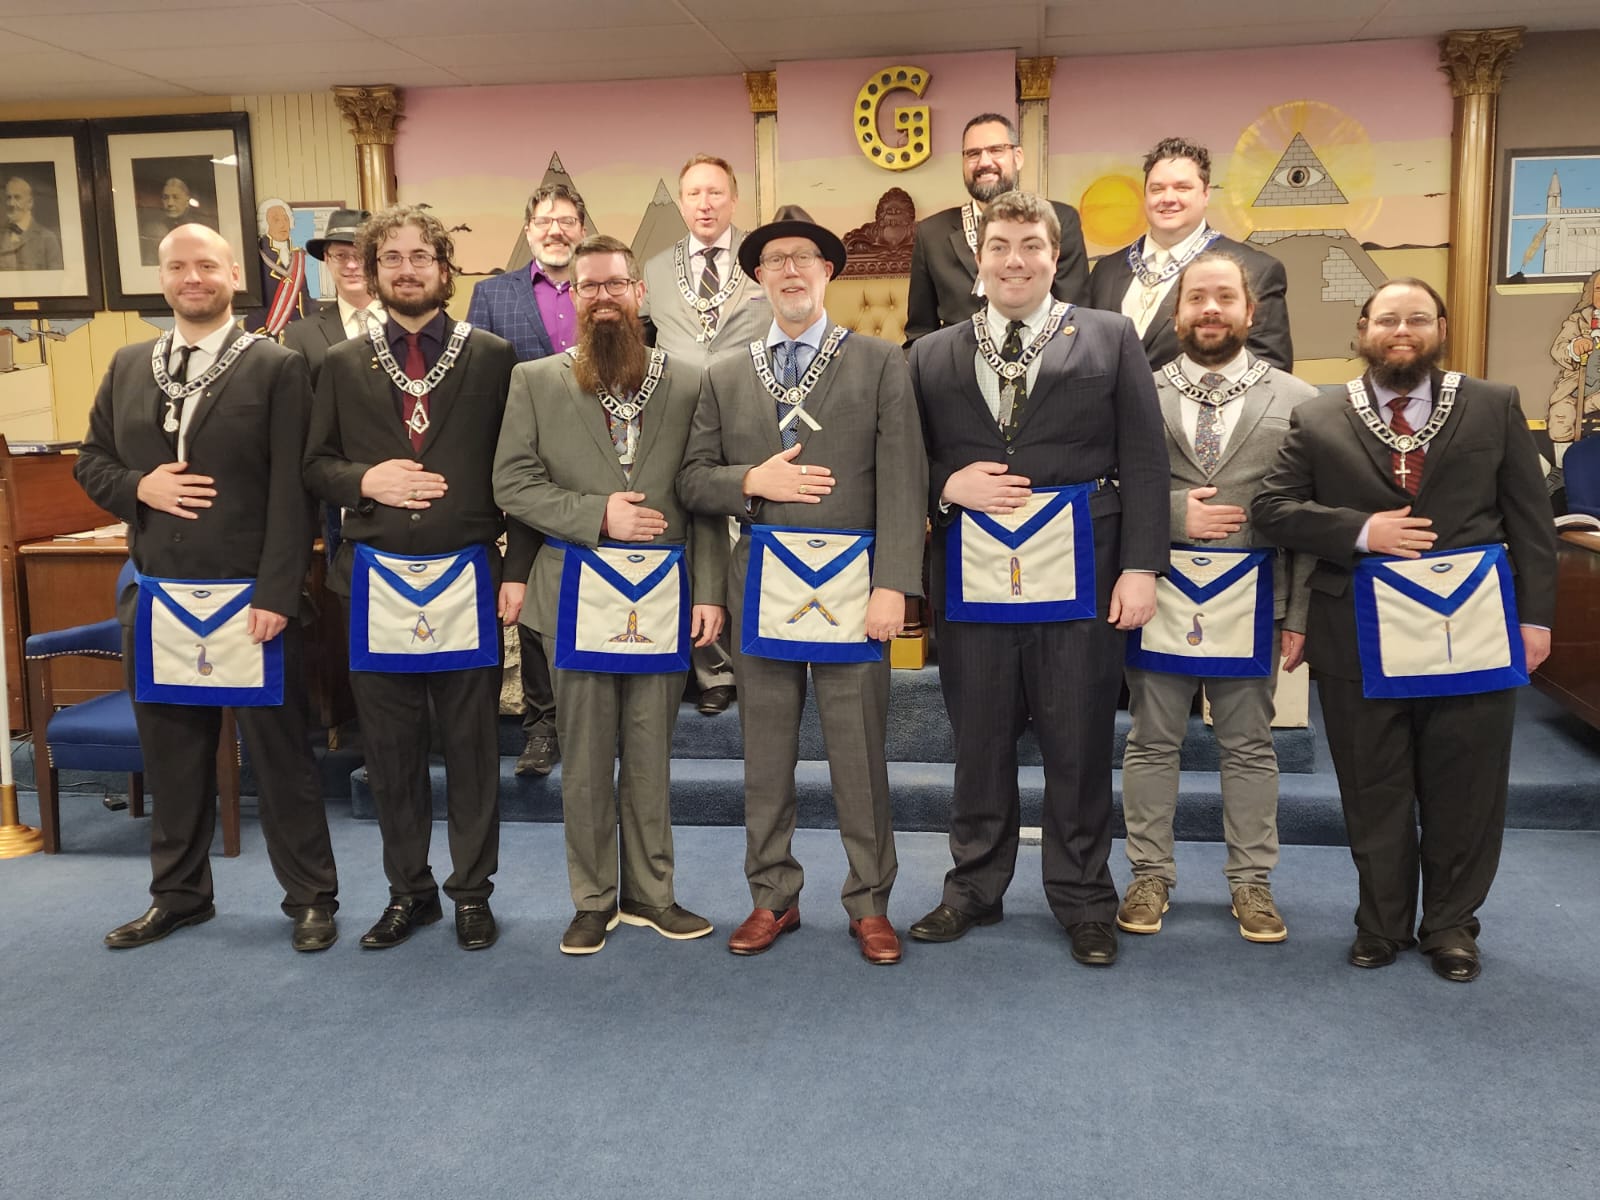 2023 Broad Ripple Lodge Officers - two rows of members standing in front of the Worshipful Master's chair.